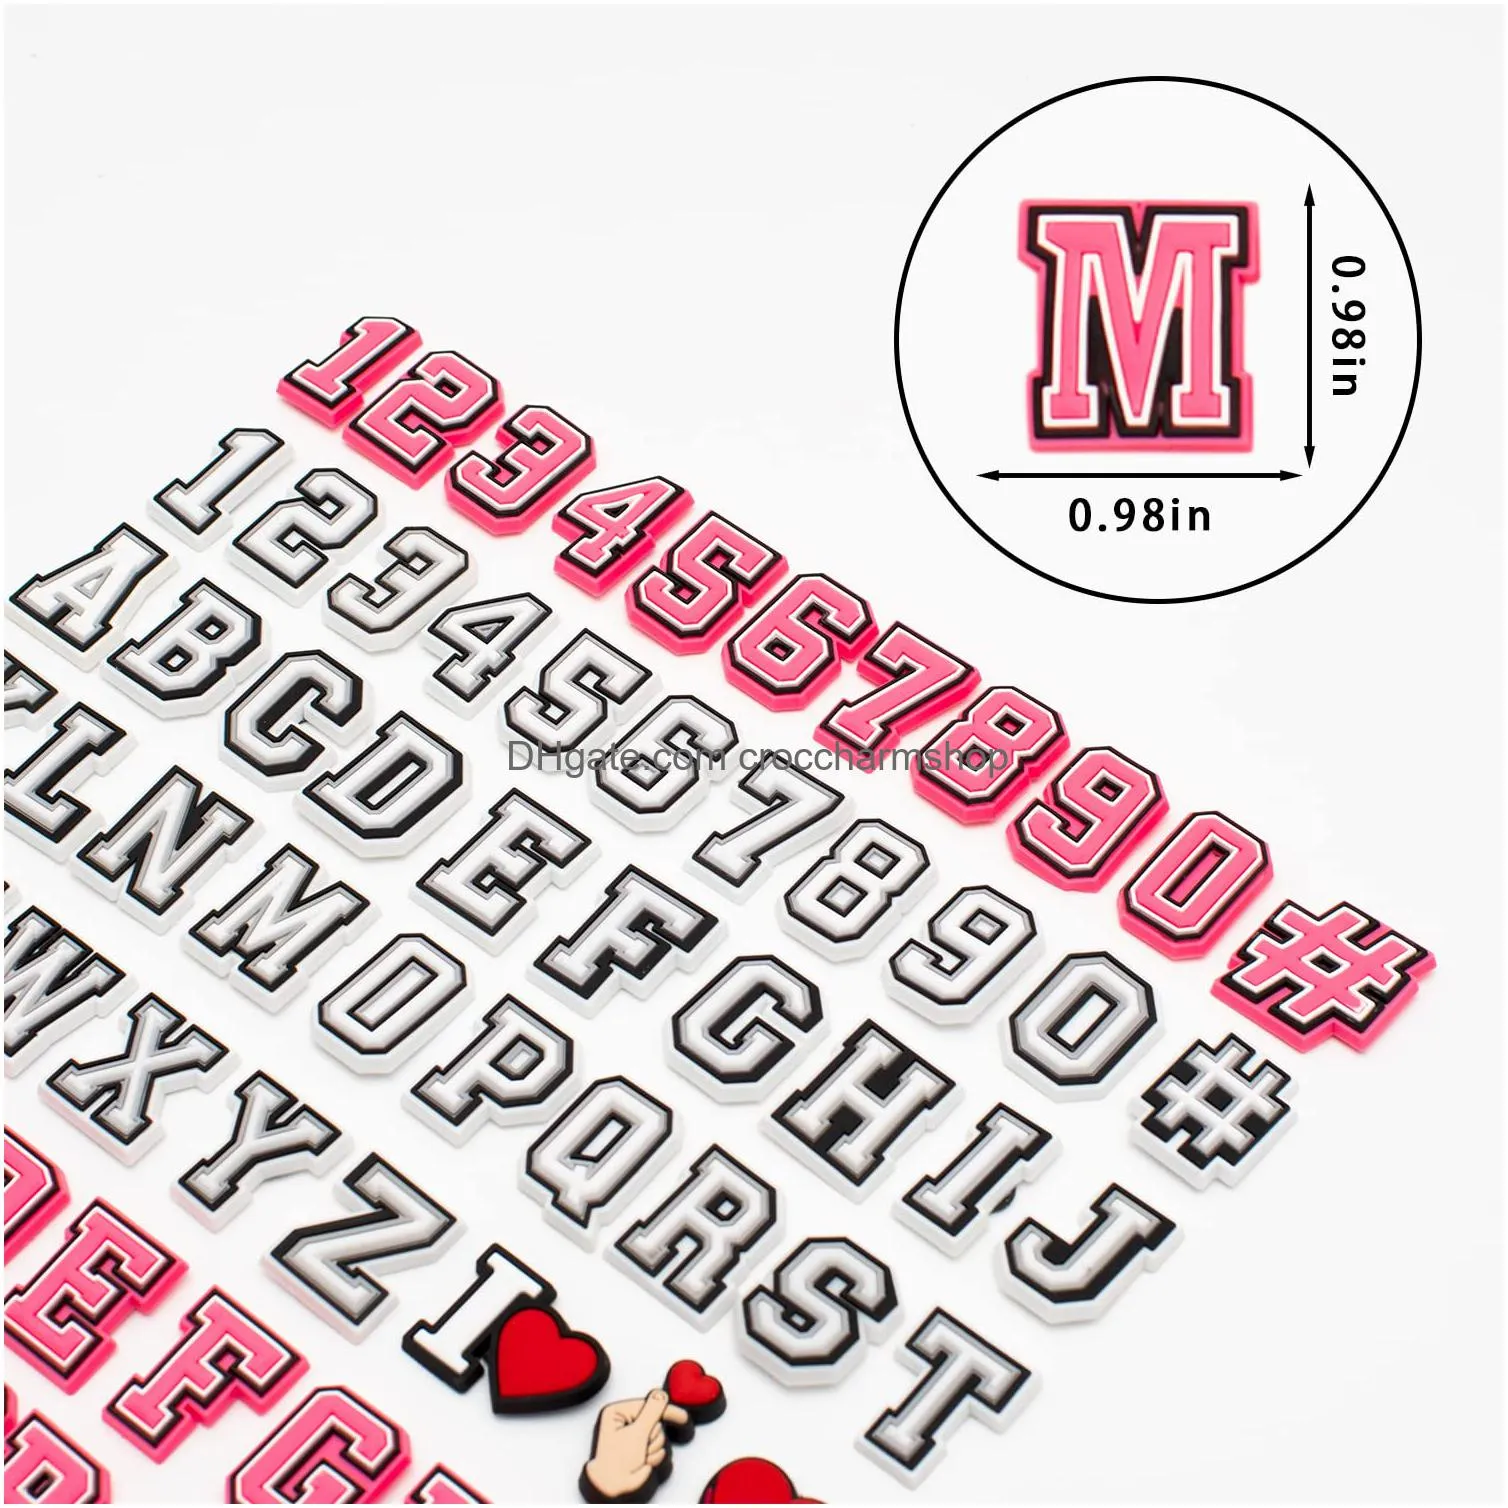 croc charms letters and numbers pvc letter croc charms pack number croc charms shoes clog sandal bracelet wristband decoration croc charms for teens boys girls man woman